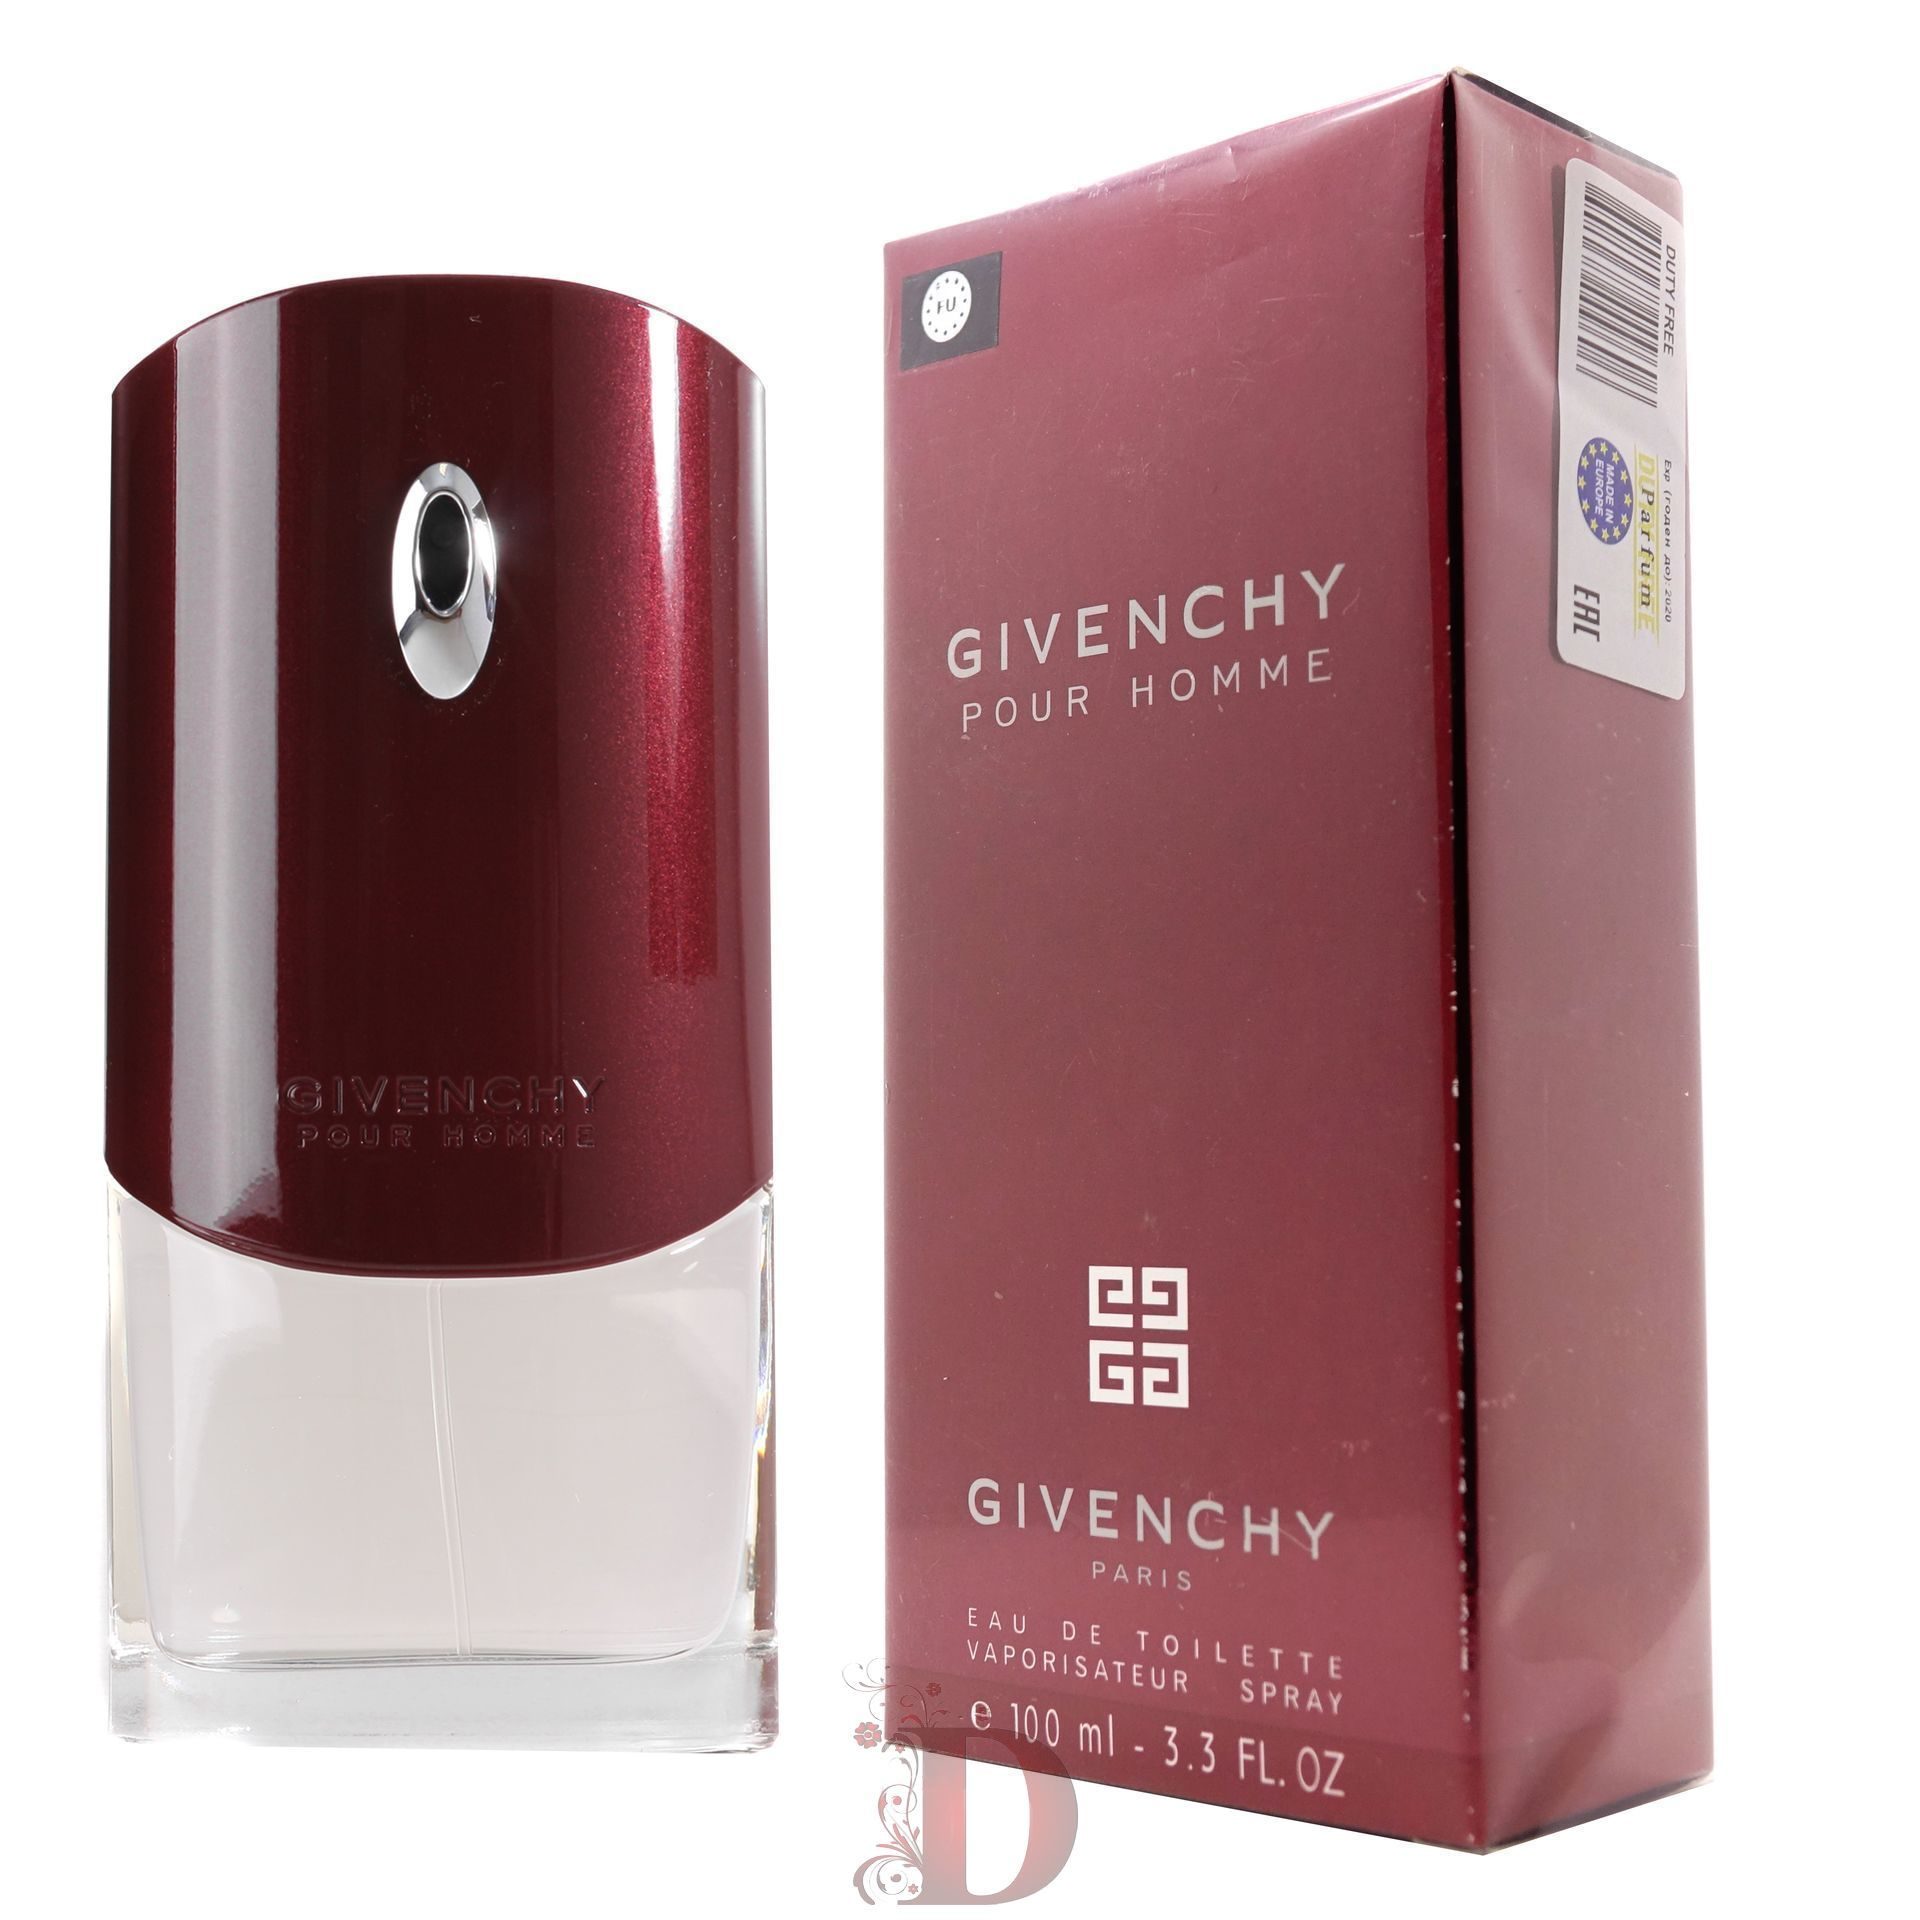 Givenchy pour homme 100